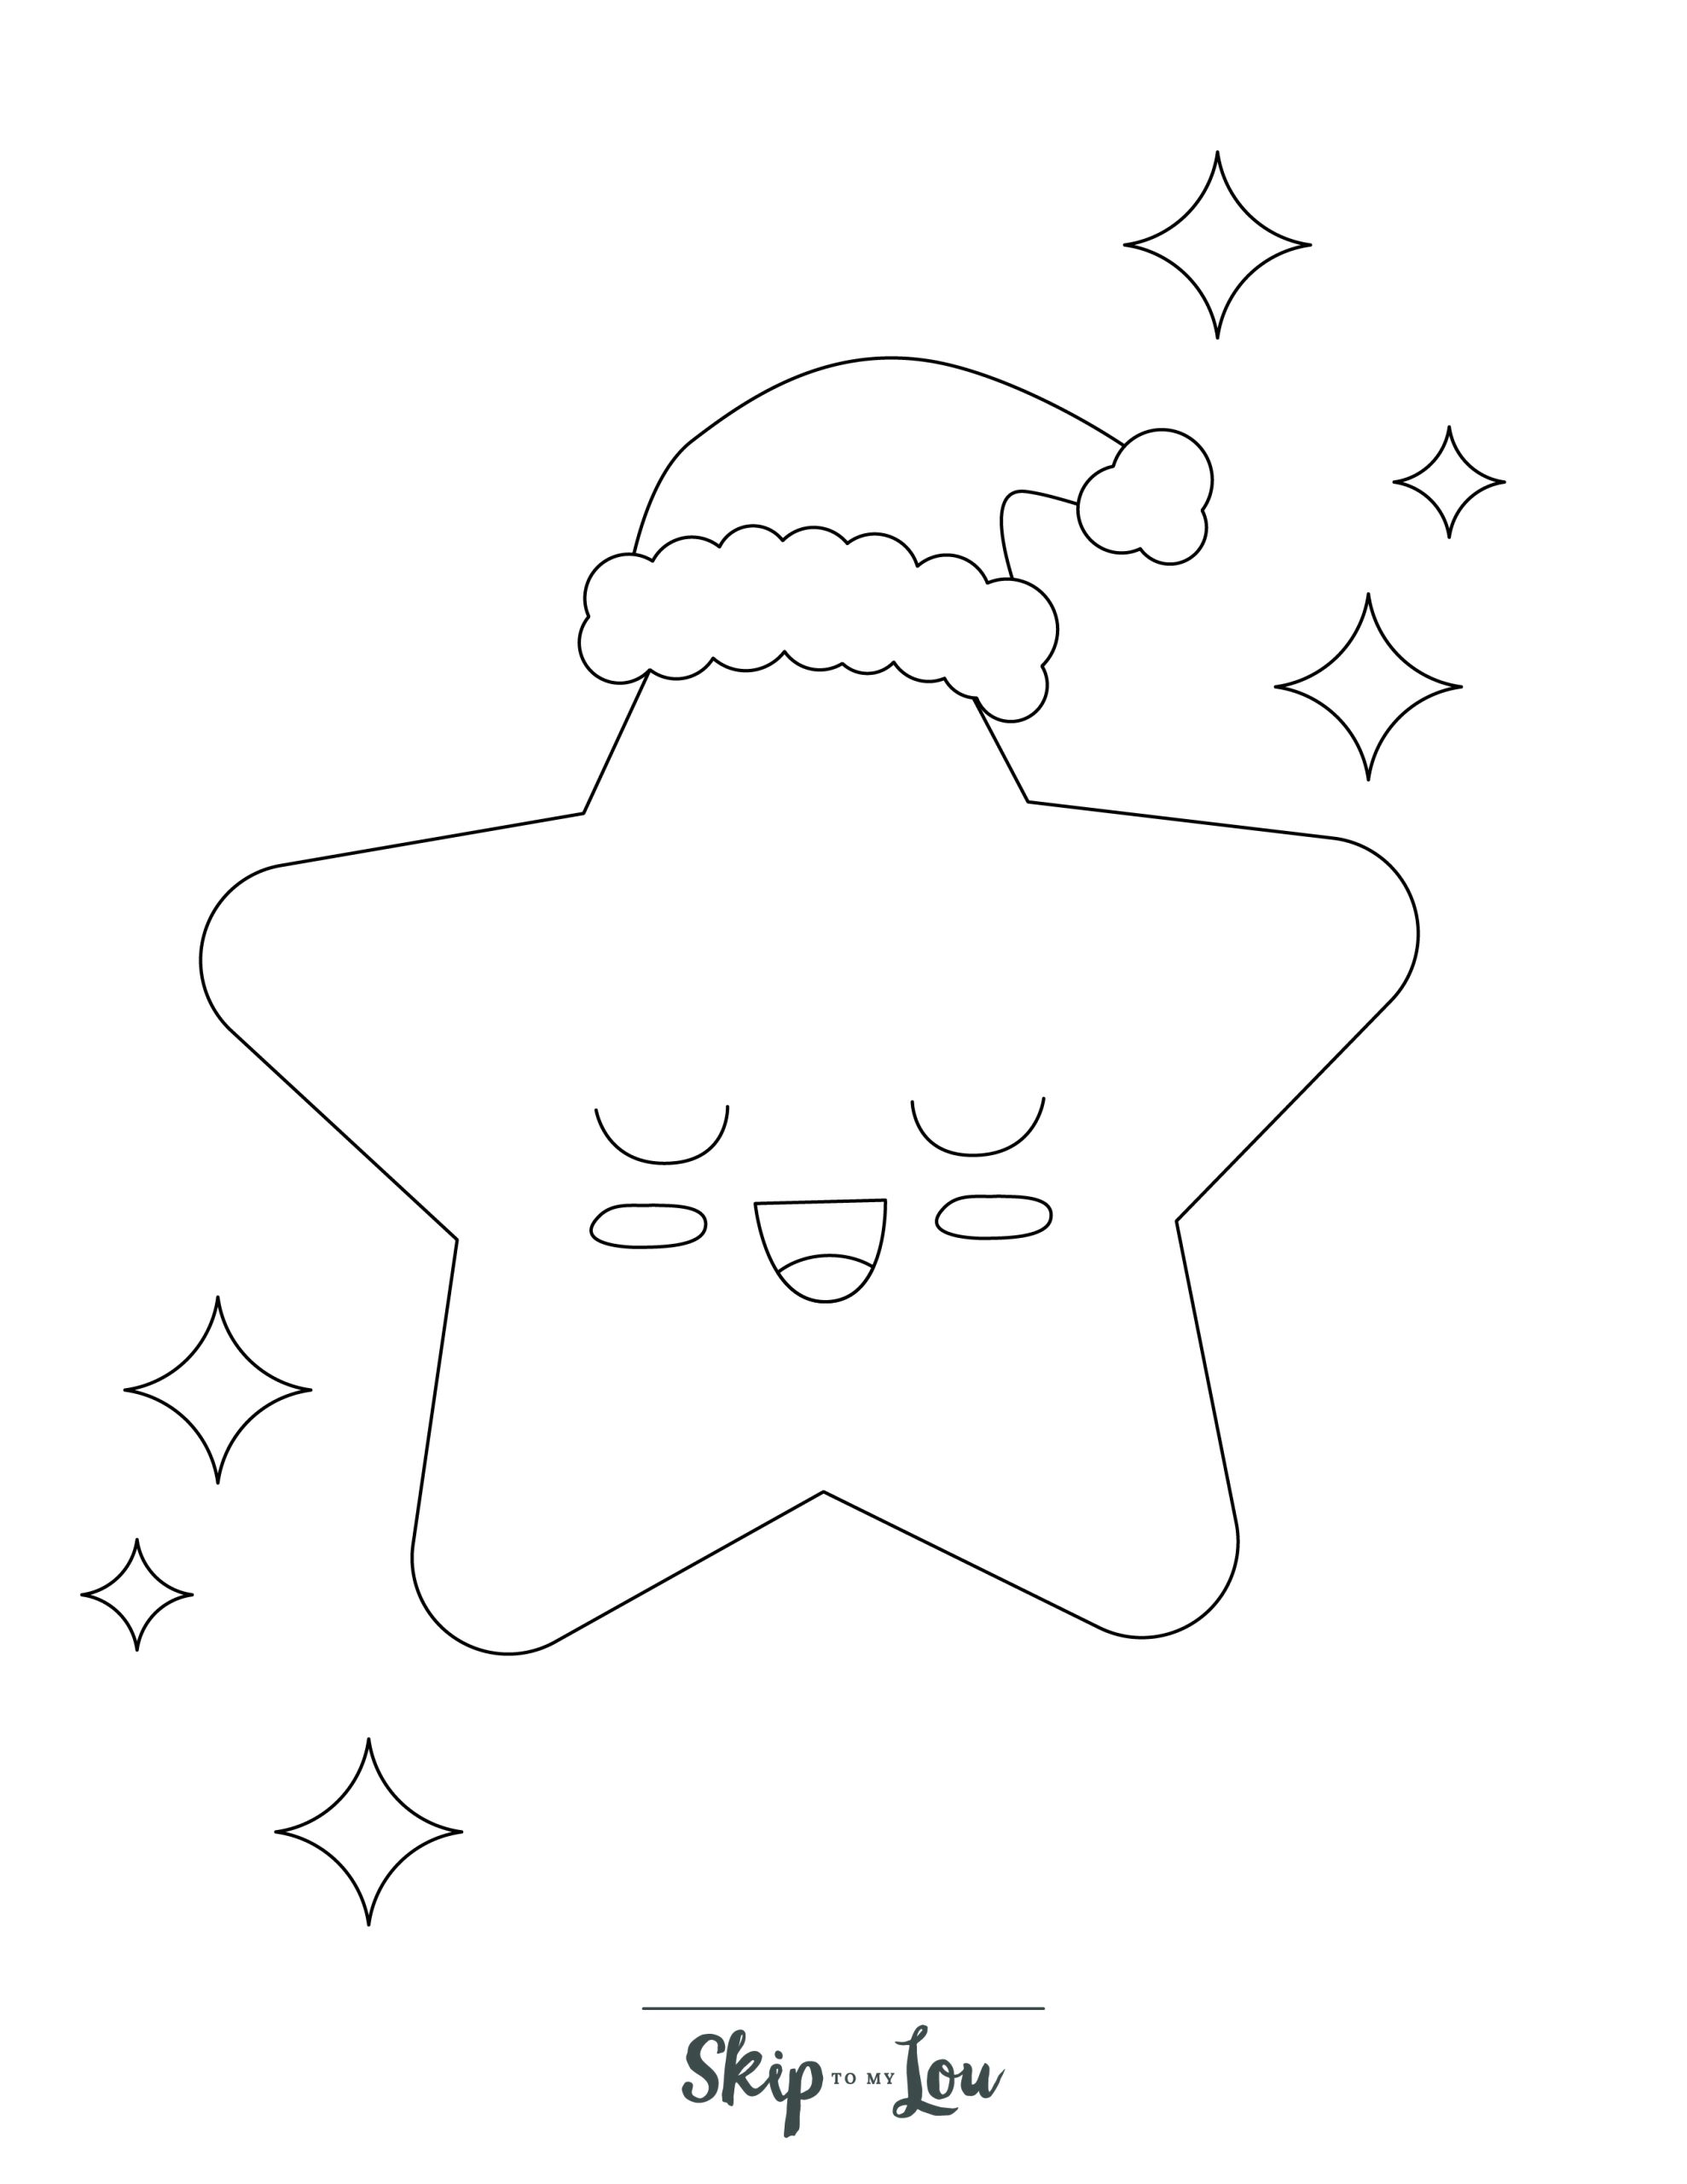 Star Coloring Page 9 - Line drawing of a star wearing a Christmas hat